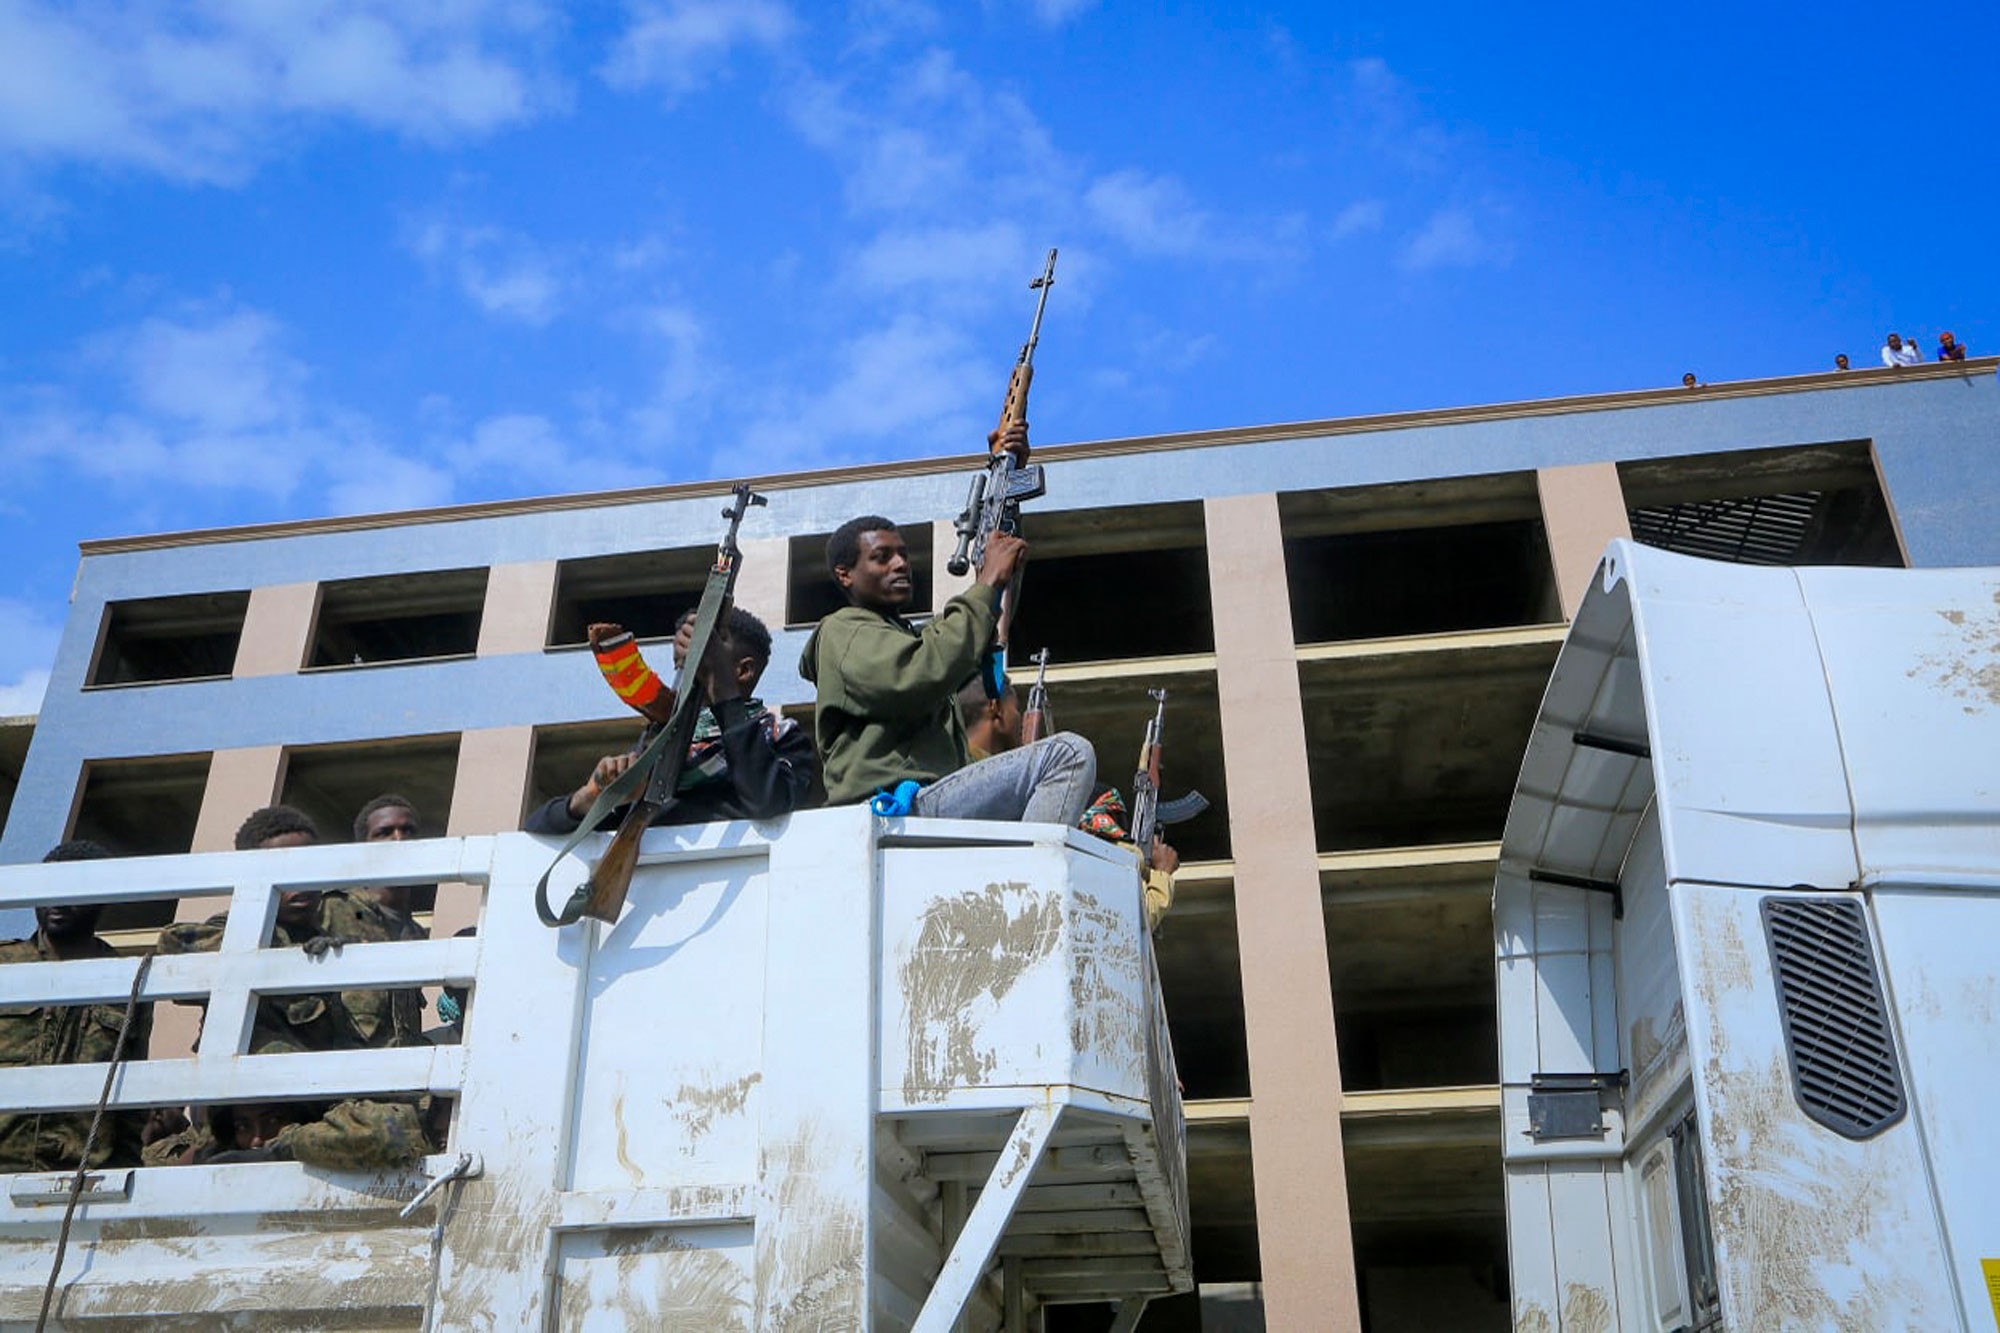 Tigrayan forces parade captured Ethiopian government soldiers and allied militia members in open-top trucks, as they are taken to a detention center in Mekelle, in the Tigray region of Ethiopia, on October 22.